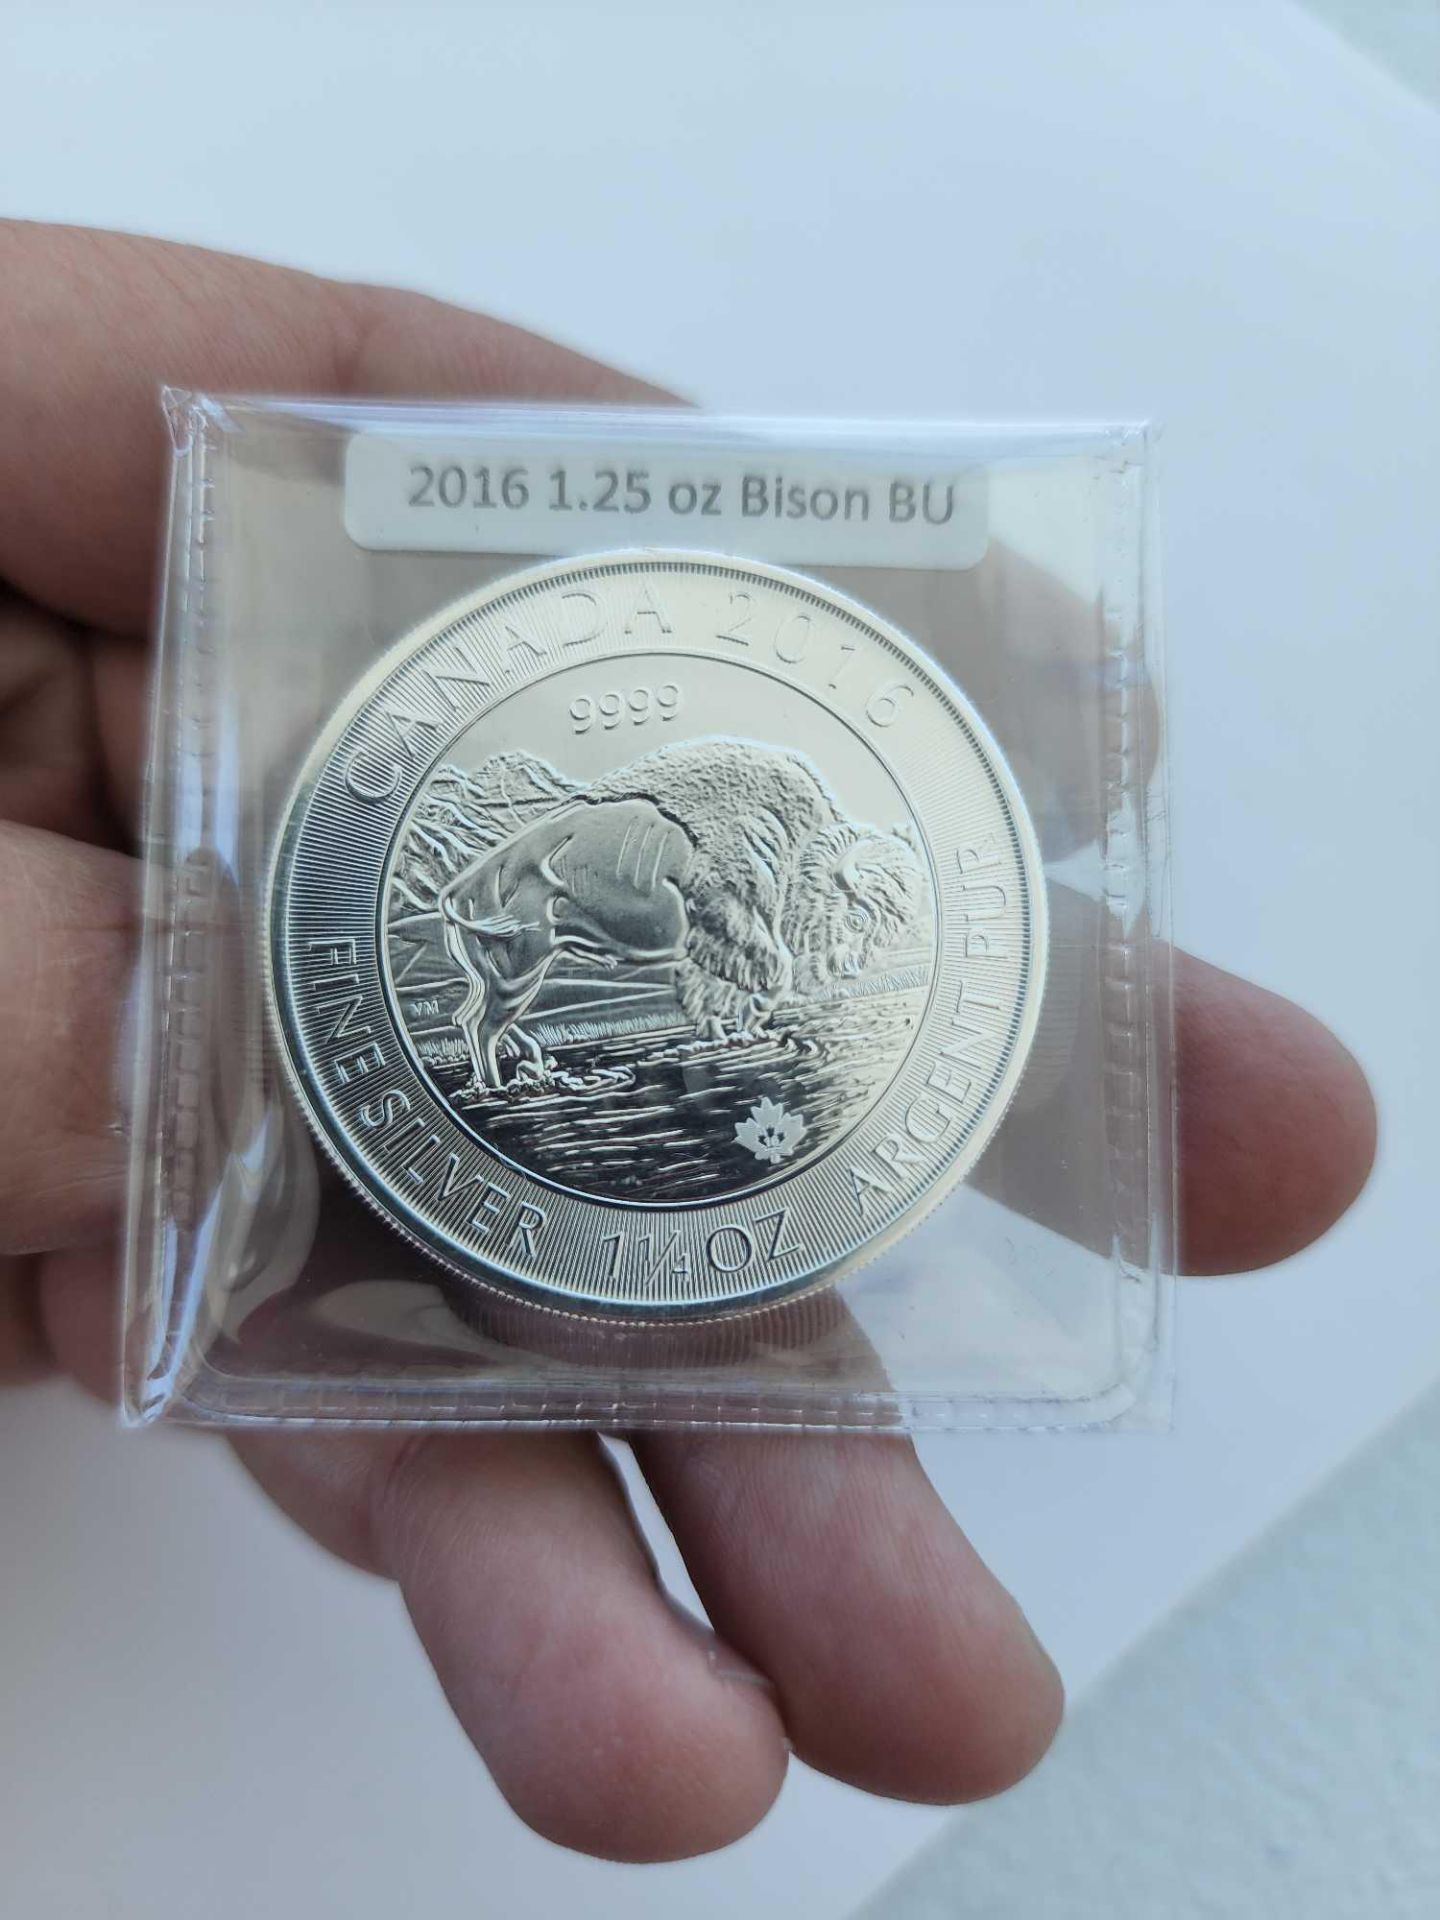 2 1.25 oz Bison Silver Coins - Image 2 of 3